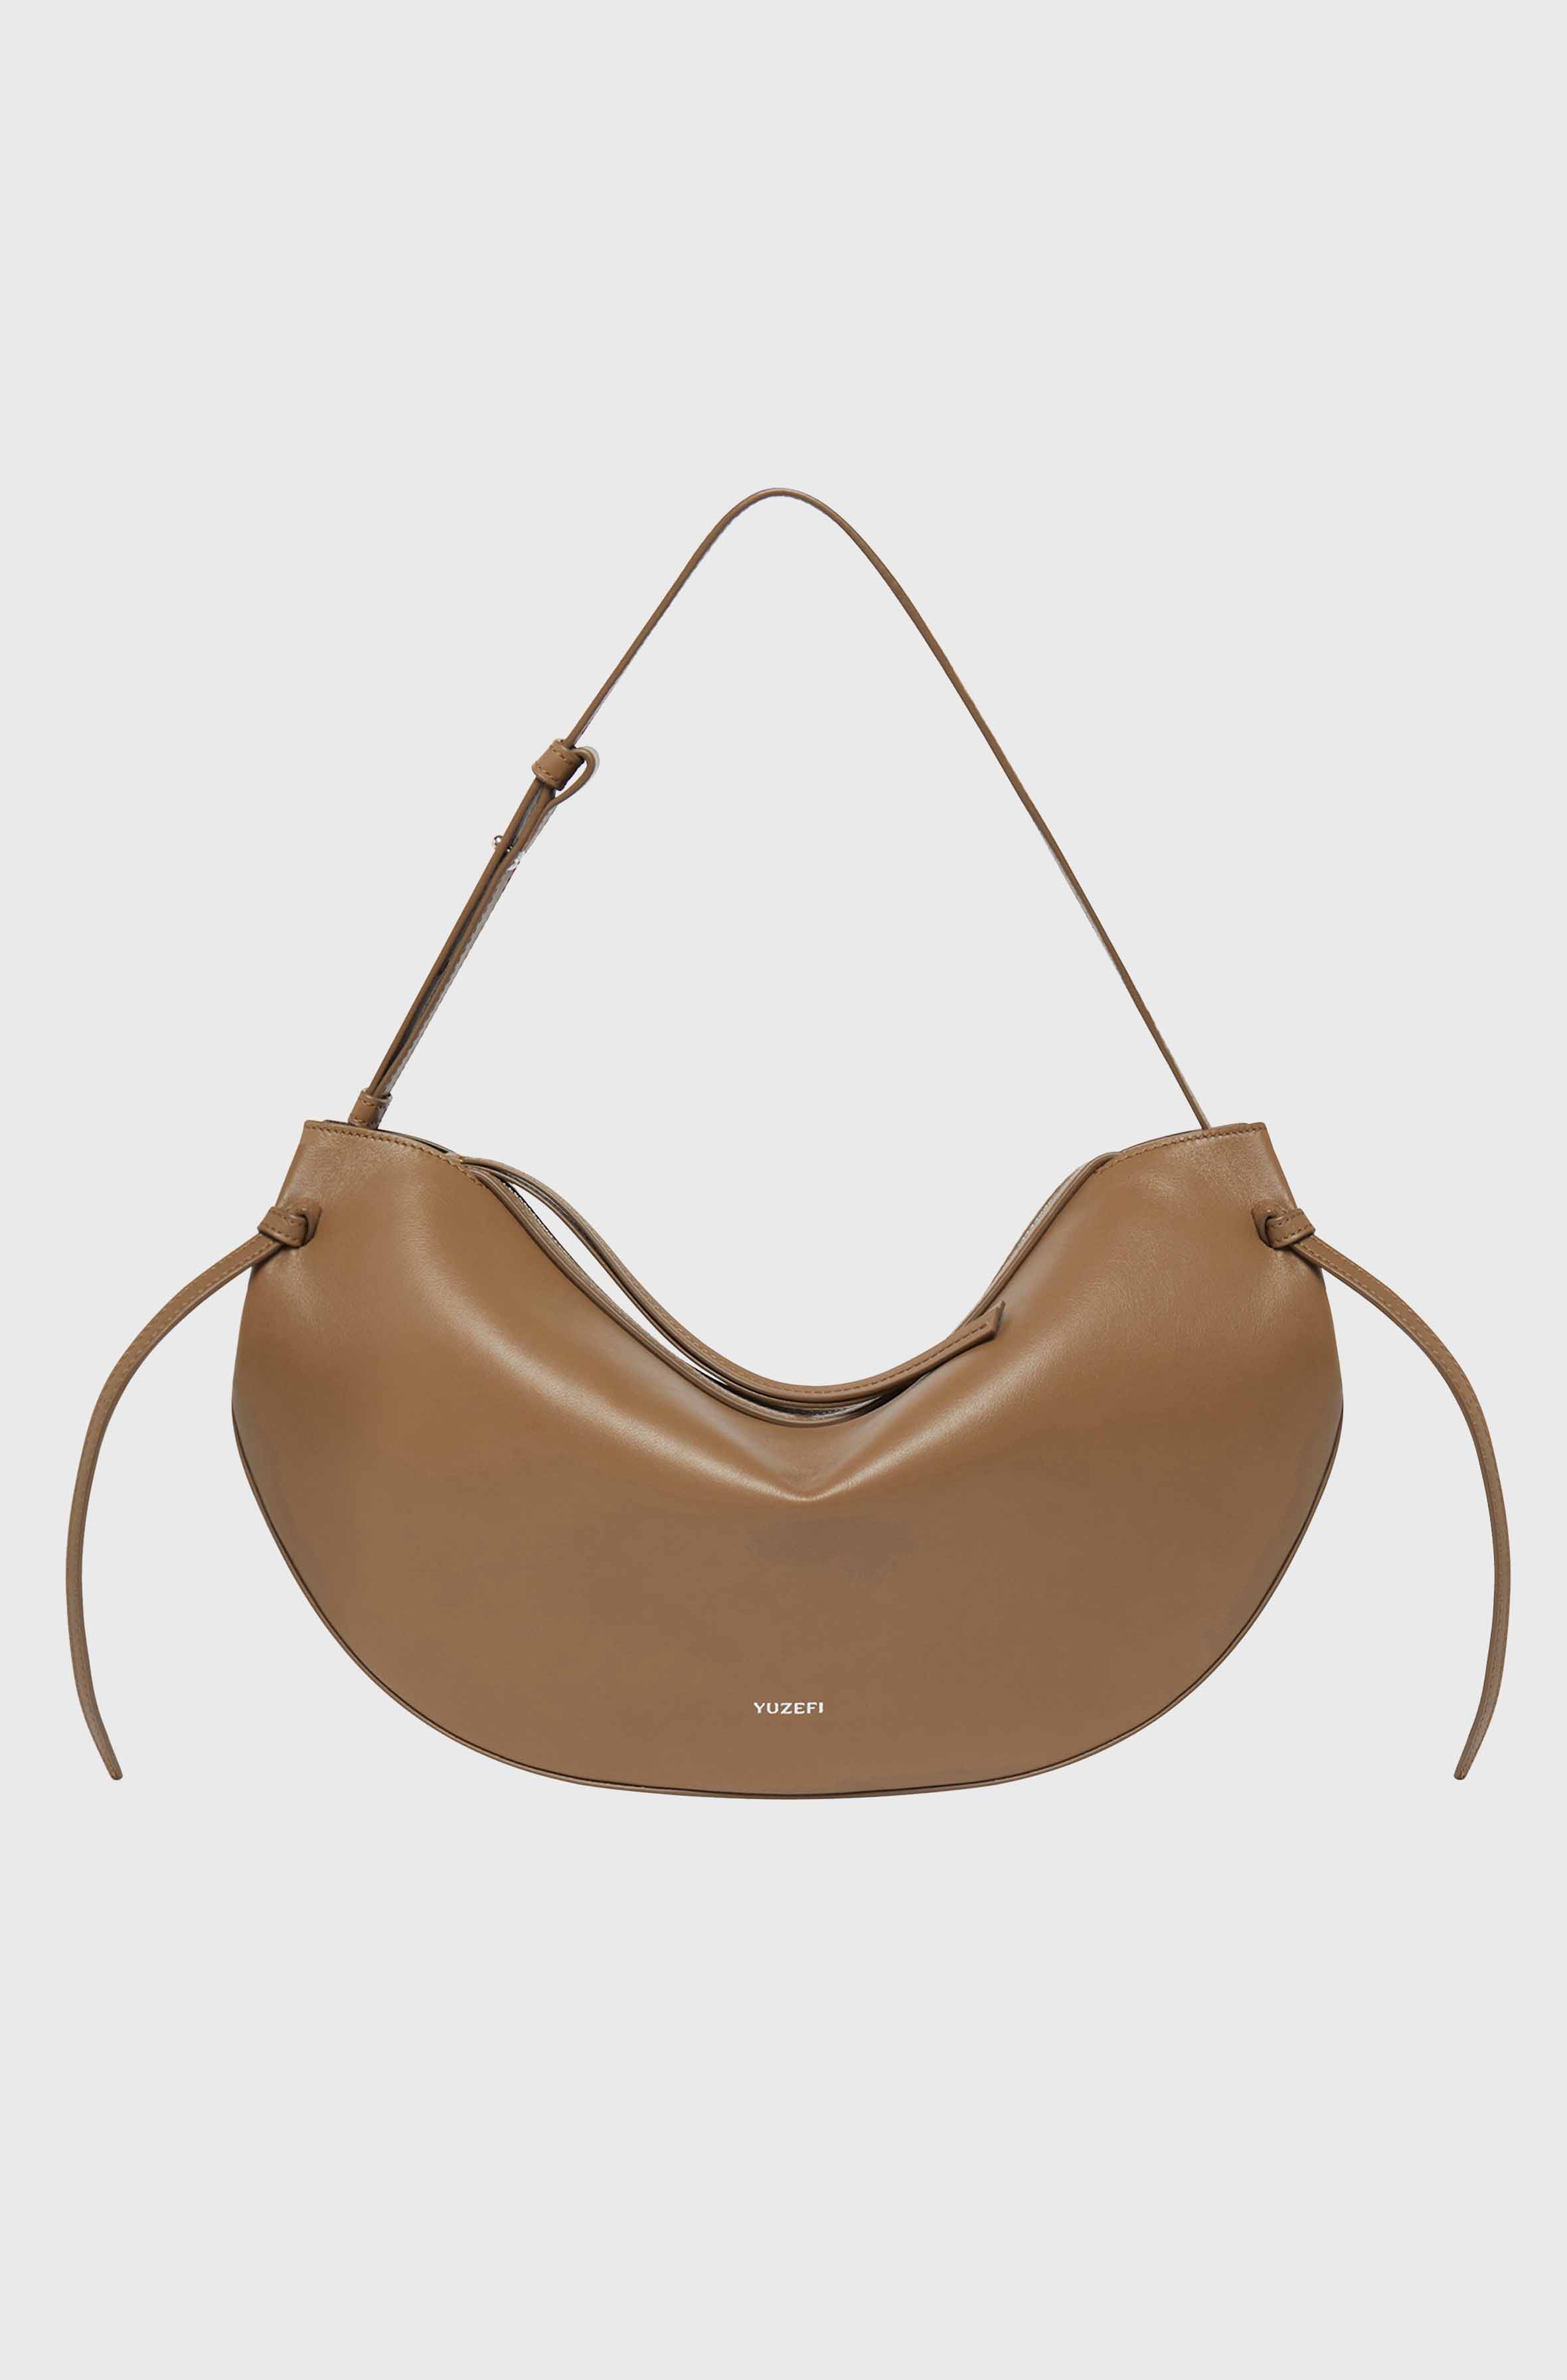 Yuzefi Large Fortune Cookie Leather Shoulder Bag - Farfetch